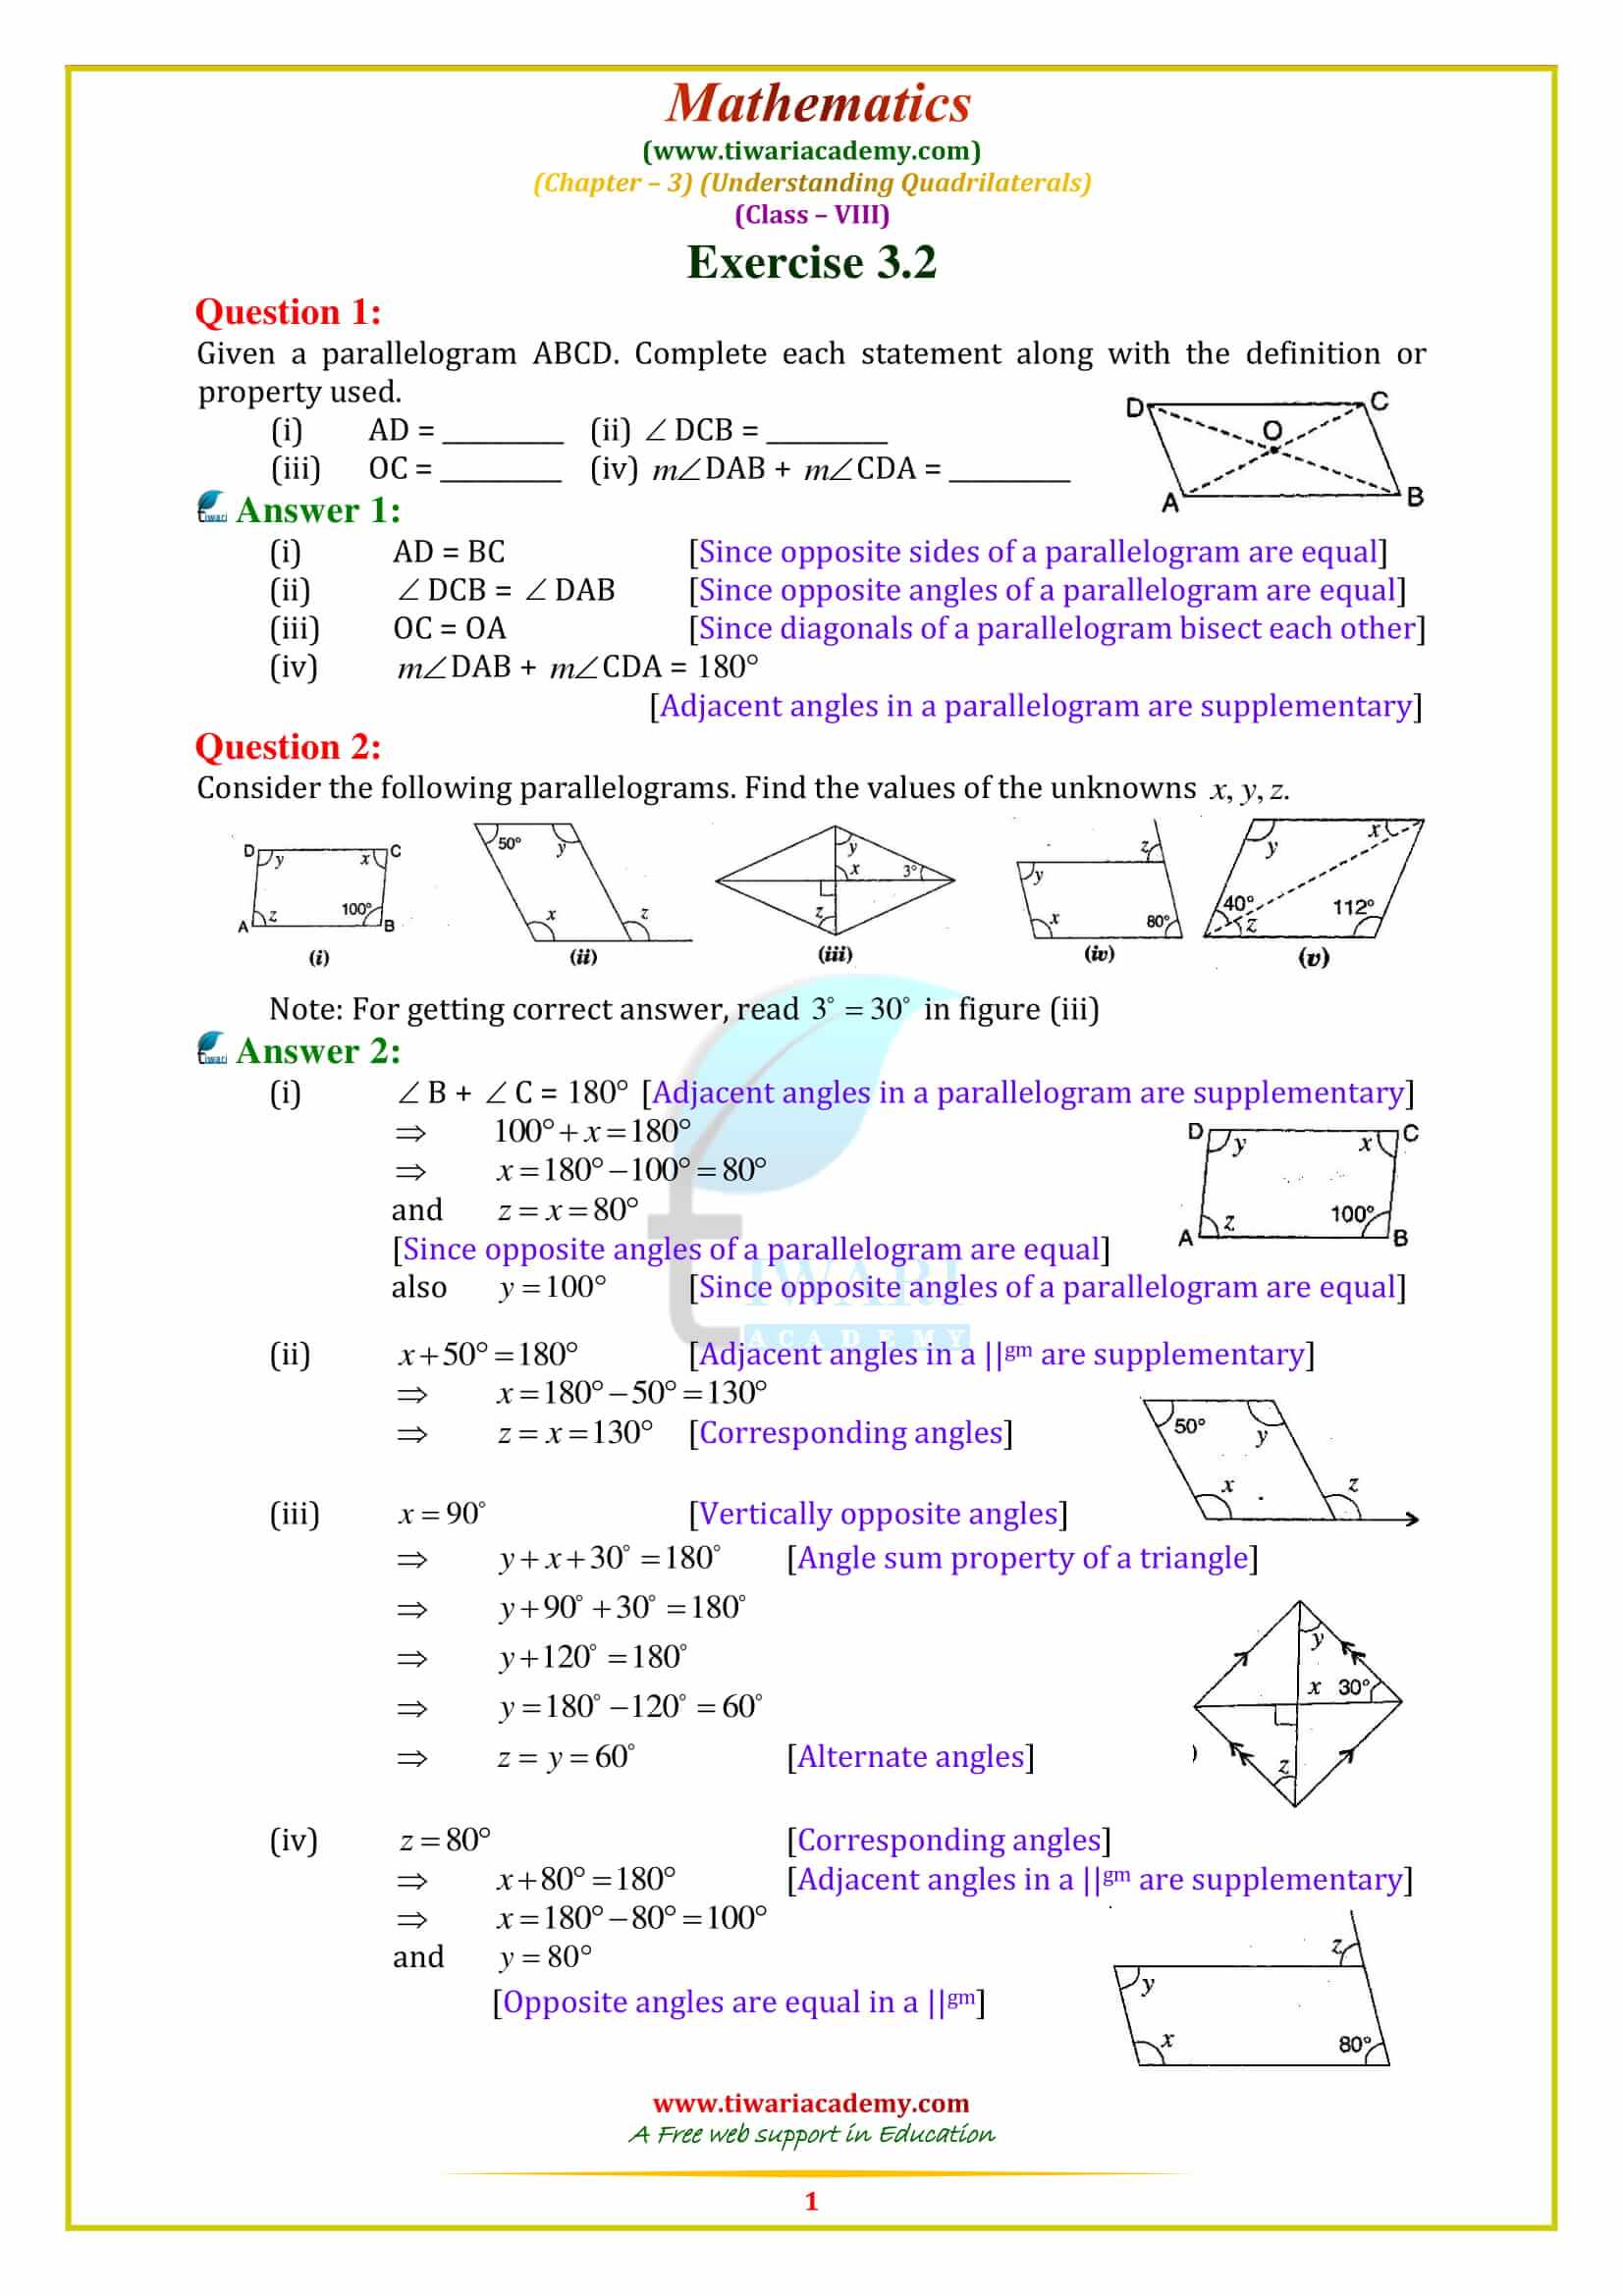 NCERT Solutions for Class 8 Maths Chapter 3 Exercise 3.3